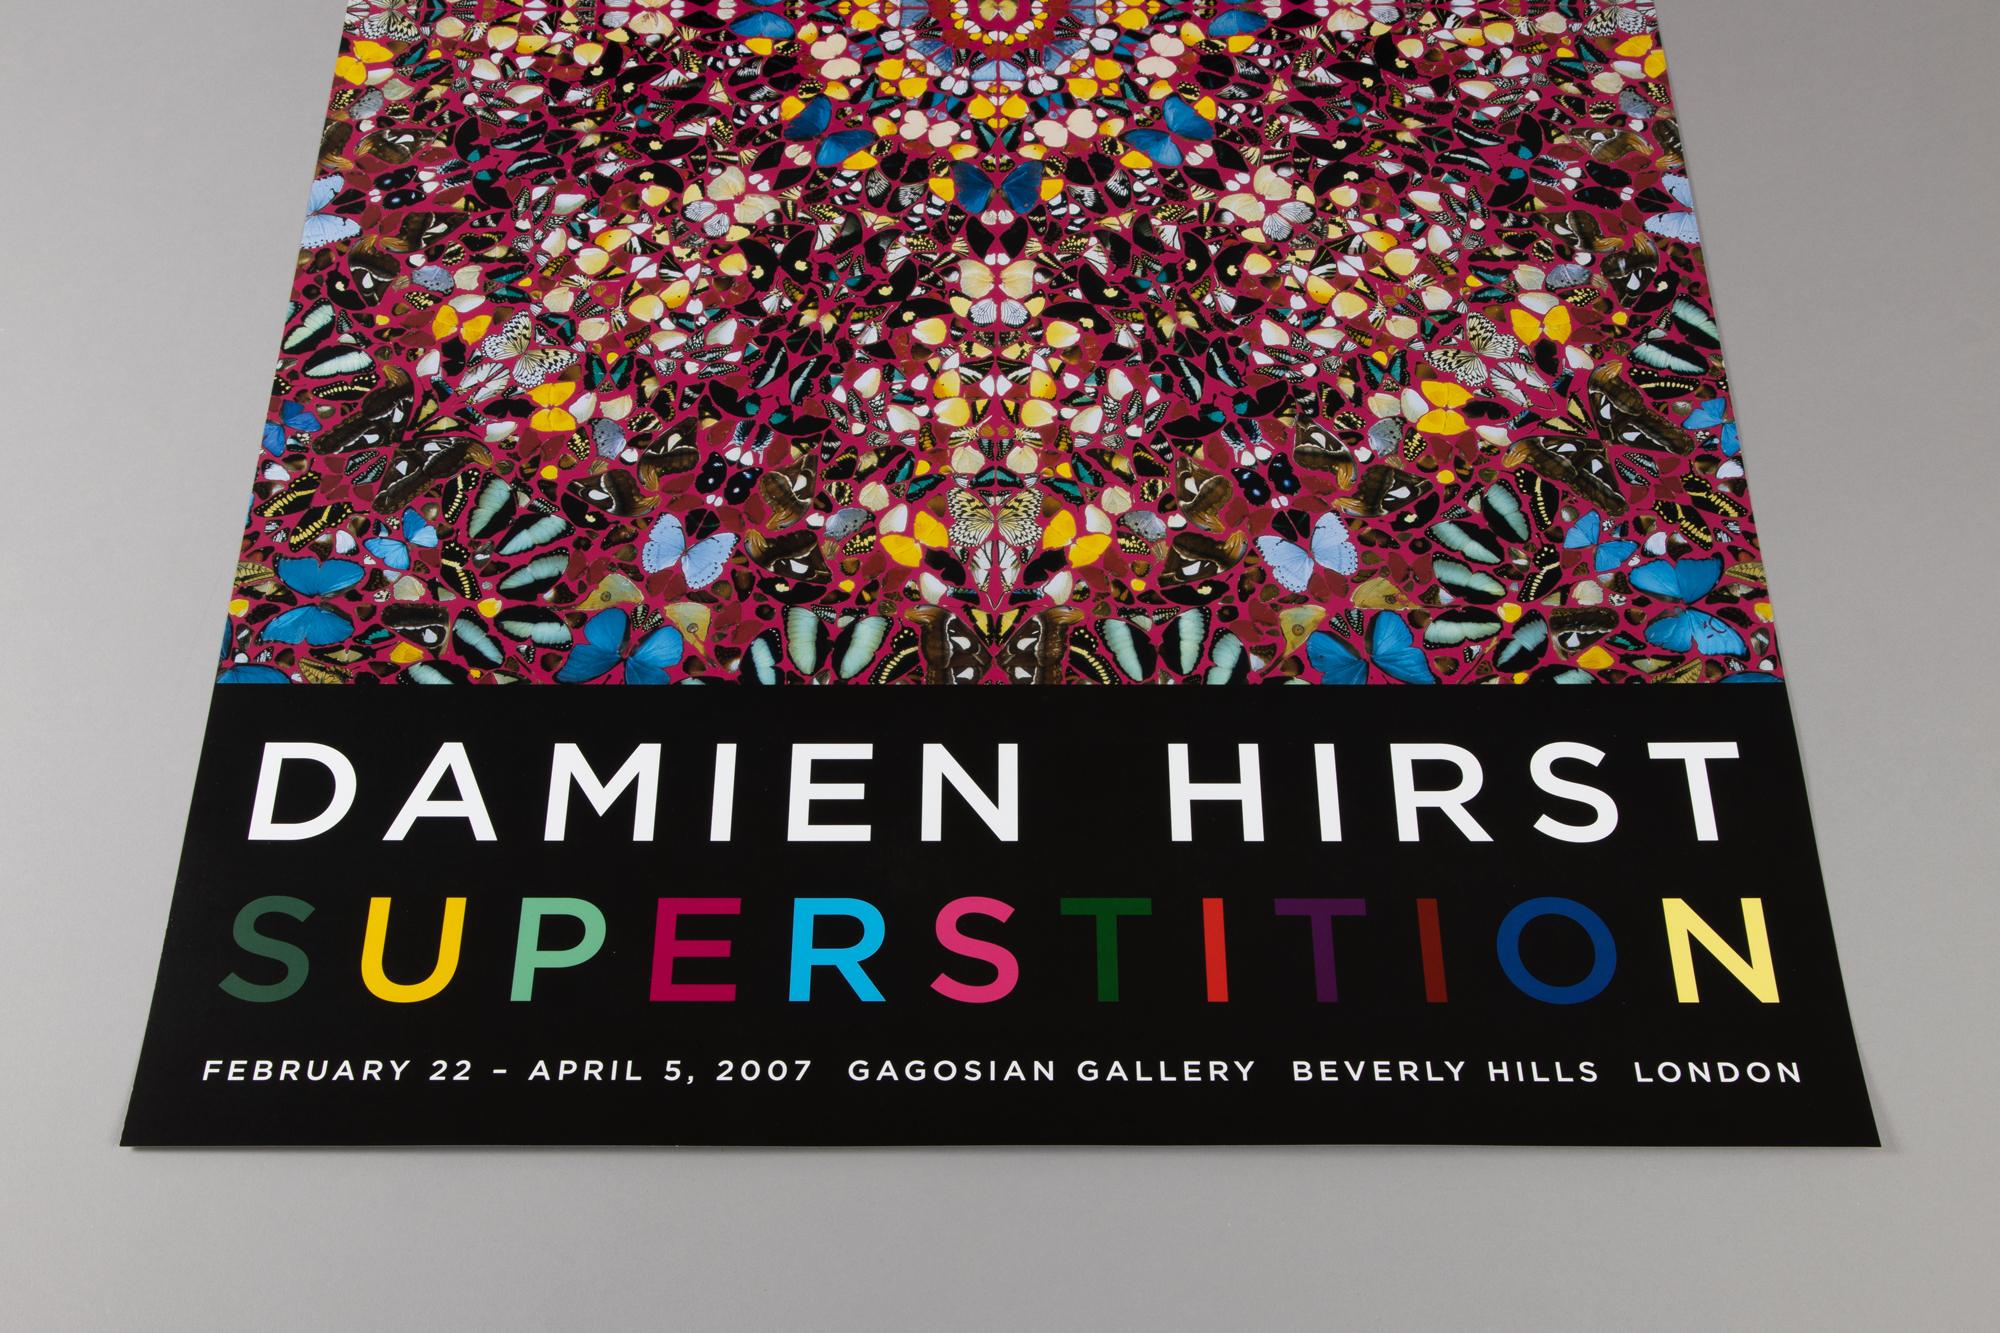 Original exhibition poster by Damien Hirst from 2007. The exhibition took place at Gagosian, Davies Street, London, and Gagosian, Beverly Hills. 

Damien Hirst (British, b. 1965)
Damien Hirst Superstition, 2007
Medium: Exhibition poster (offset